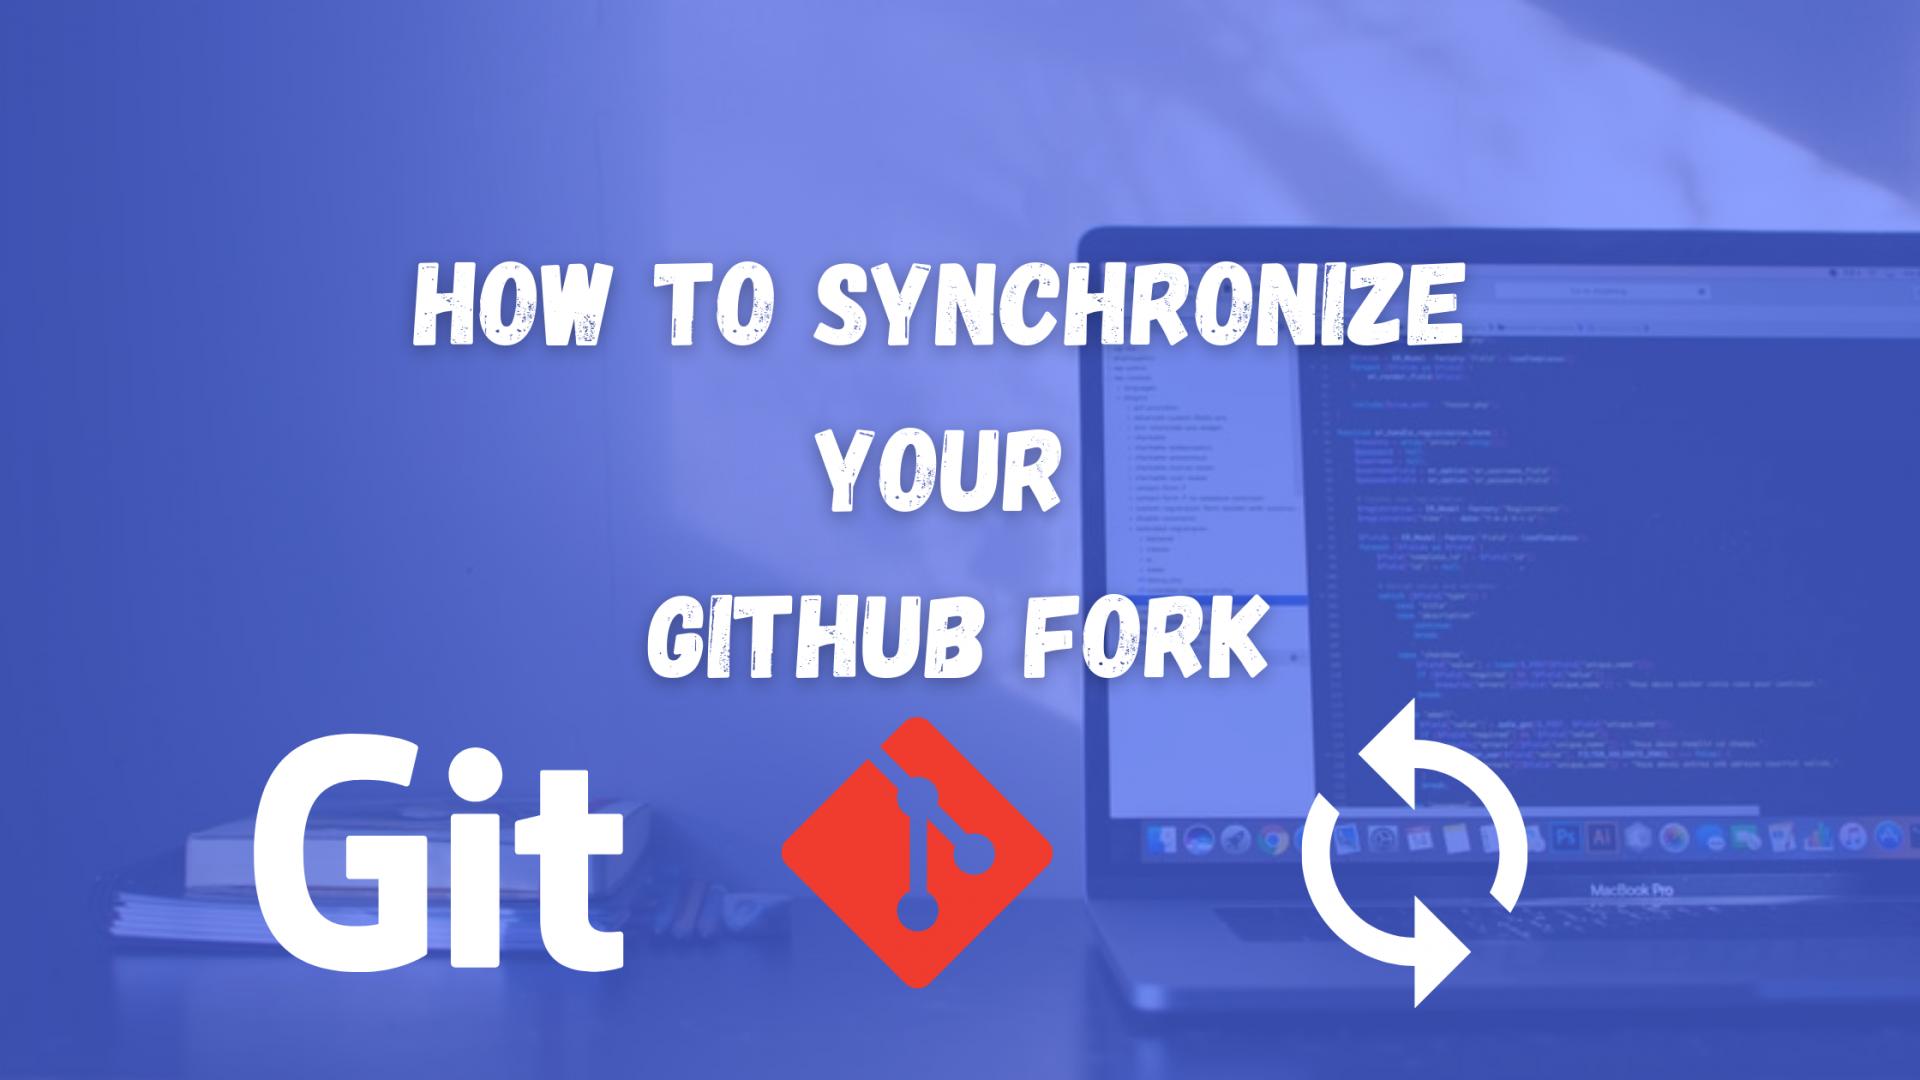 How to Synchronize Your GitHub Fork